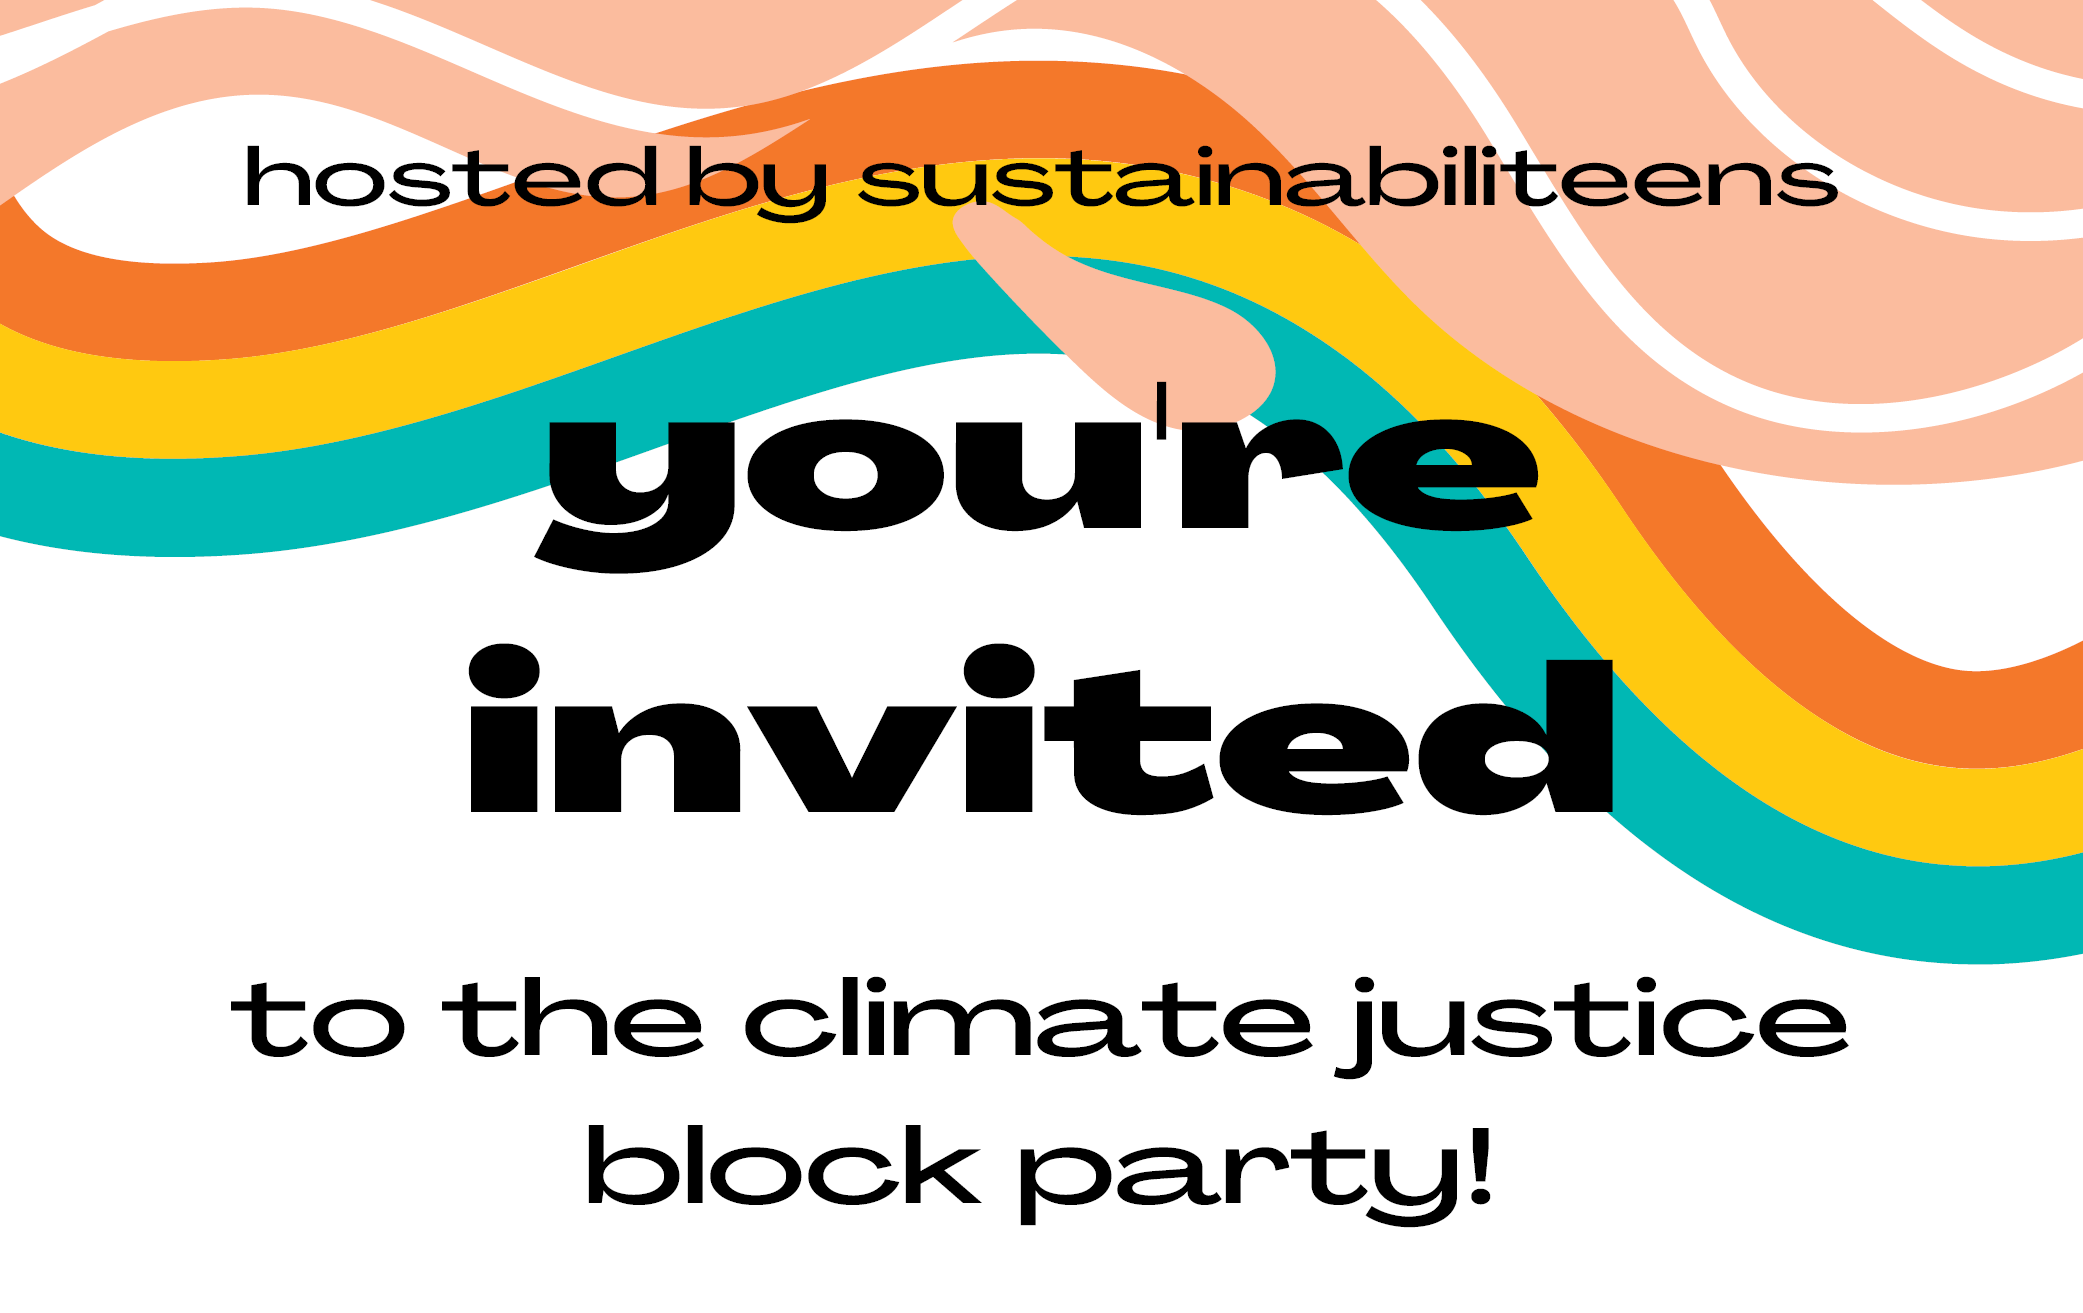 Sustainabiliteens March and Block Party Poster. Reads 'You're invited to the climate justice block party.'